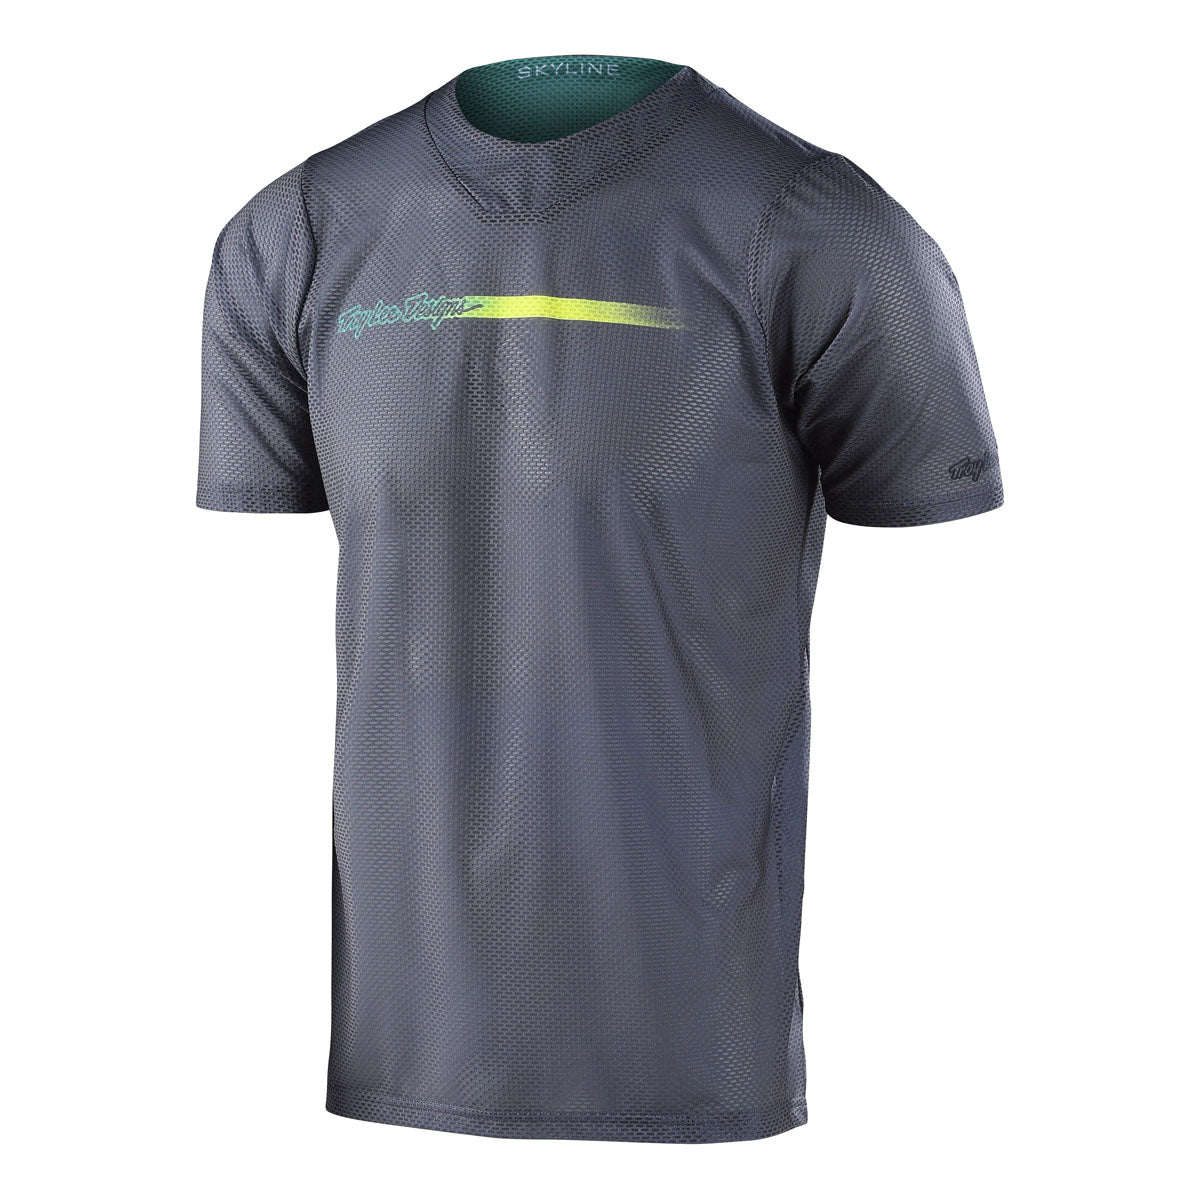 Troy Lee Designs Skyline Air Short Sleeve Jersey (CLOSEOUT) - Channel Gray